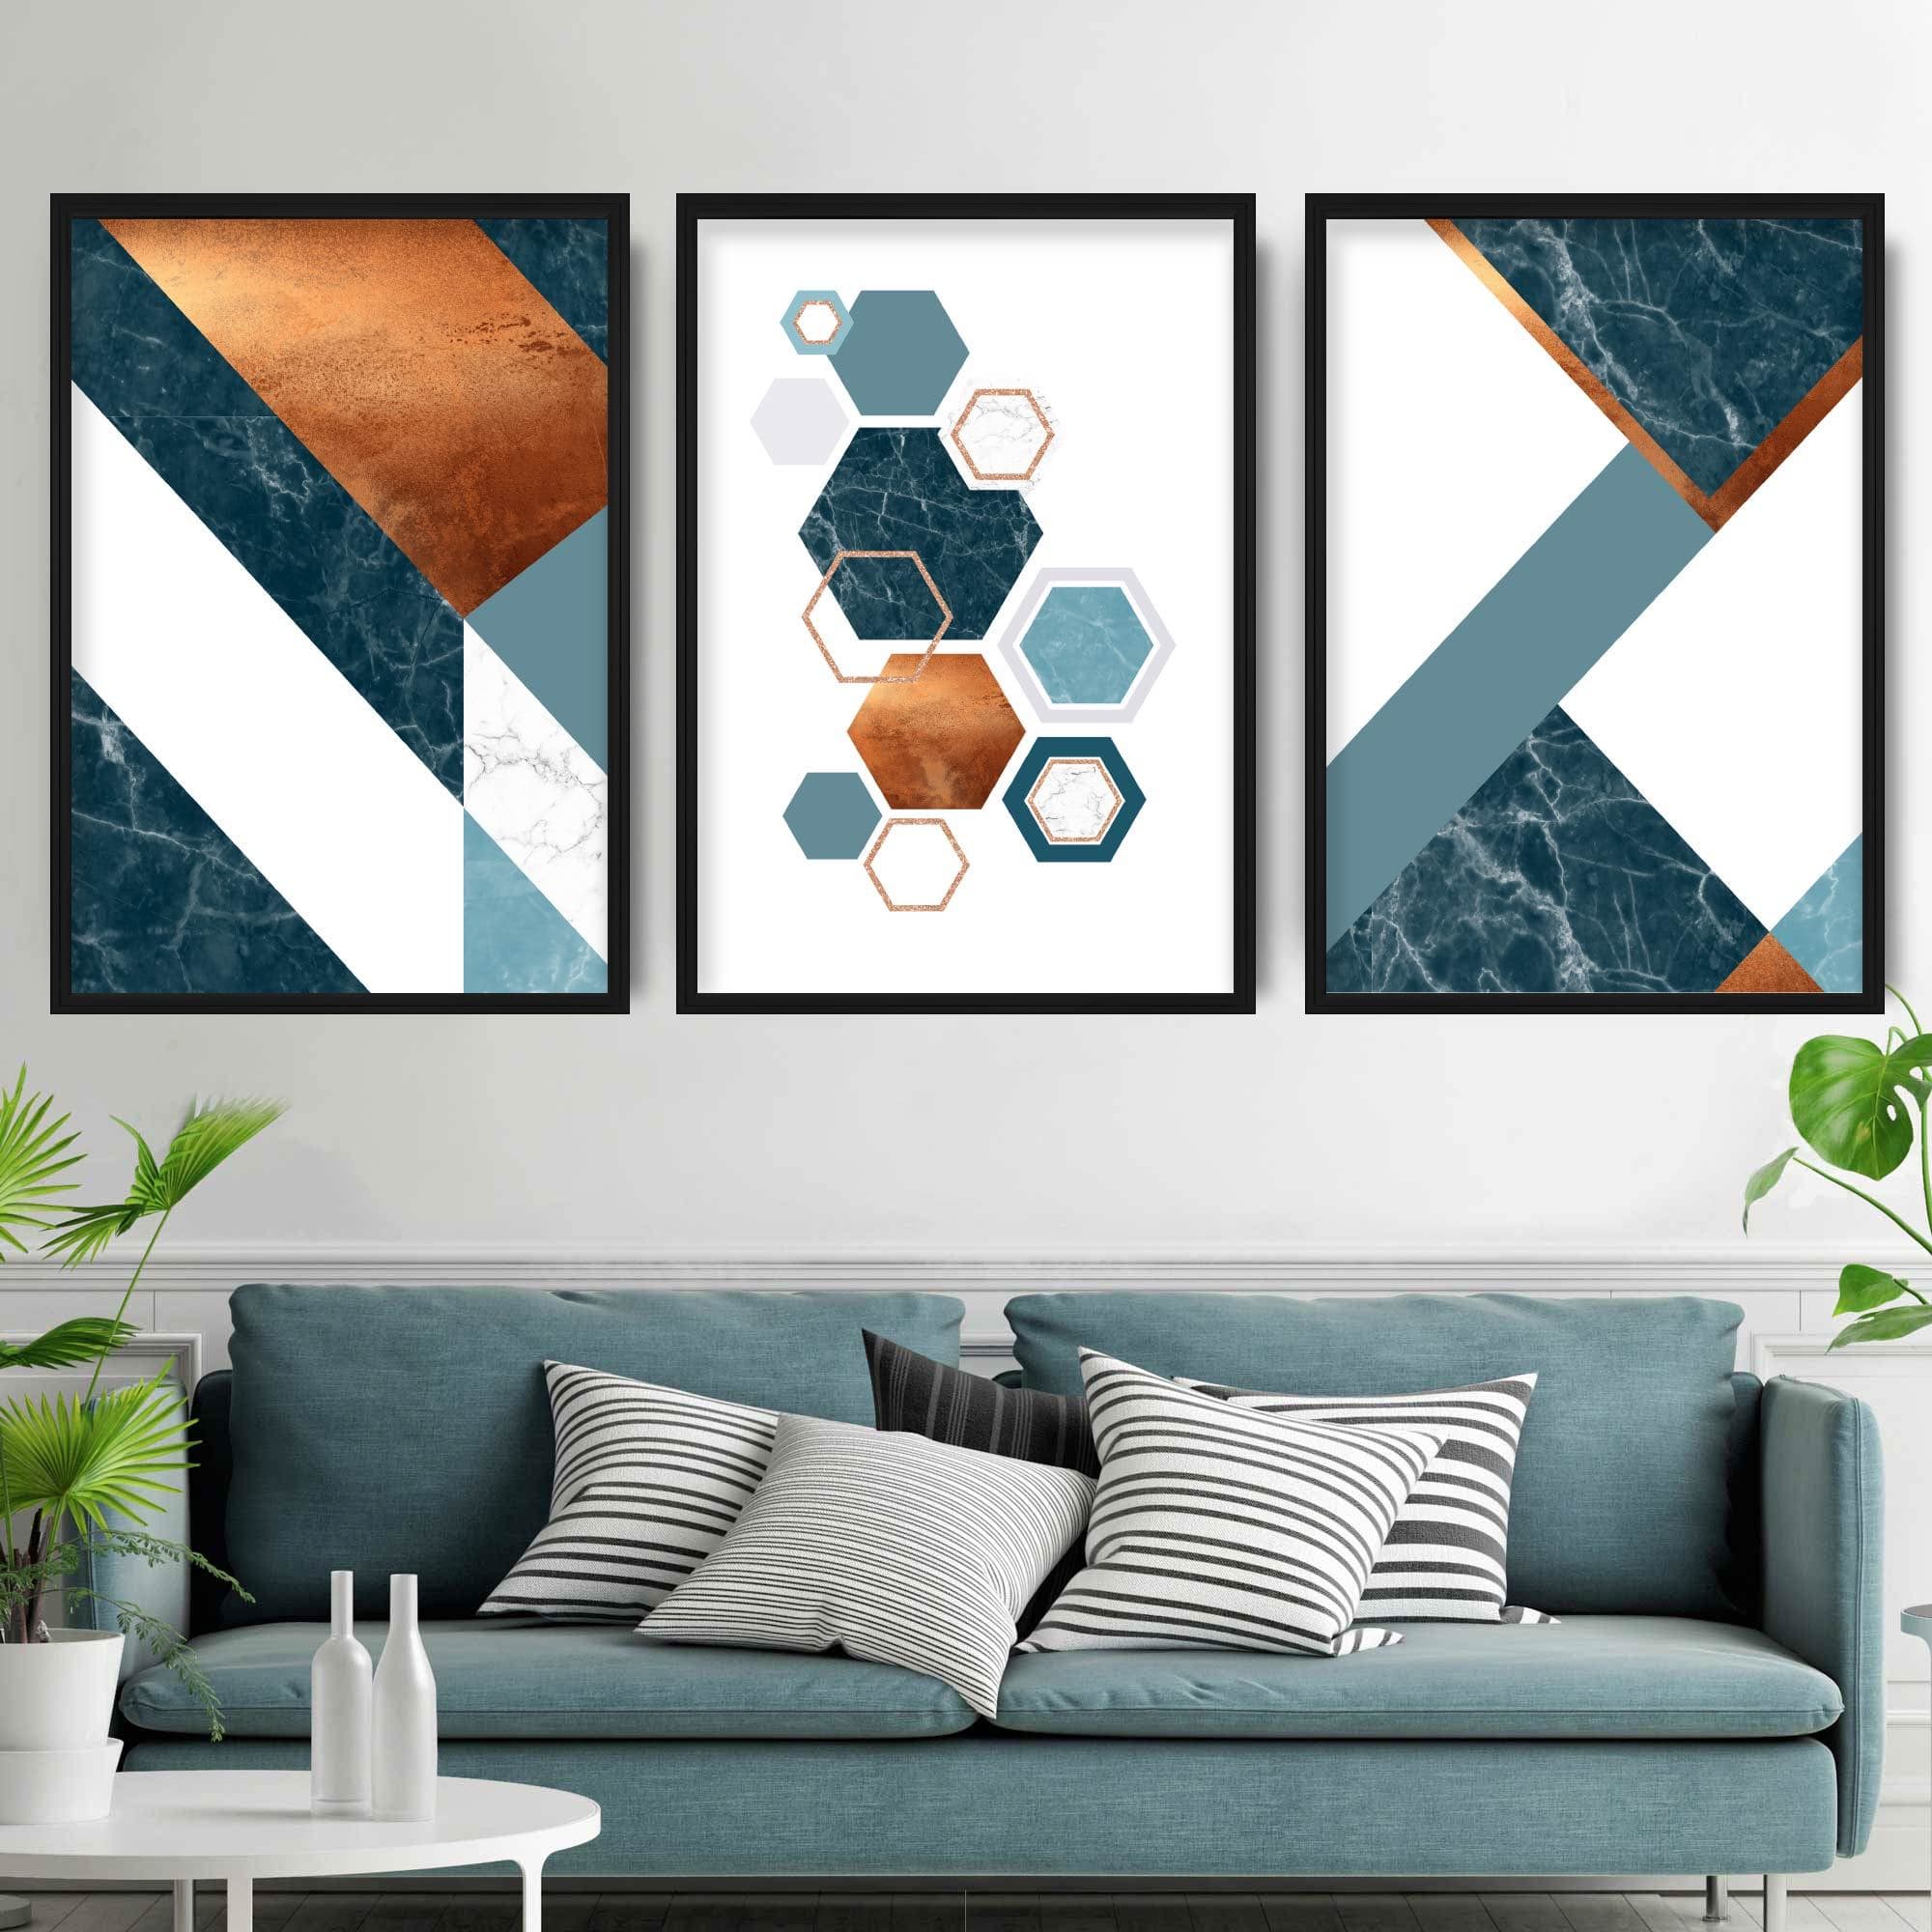 GEOMETRIC set of 3 Navy Blue Orange and Gold Art Prints Abstract Texture